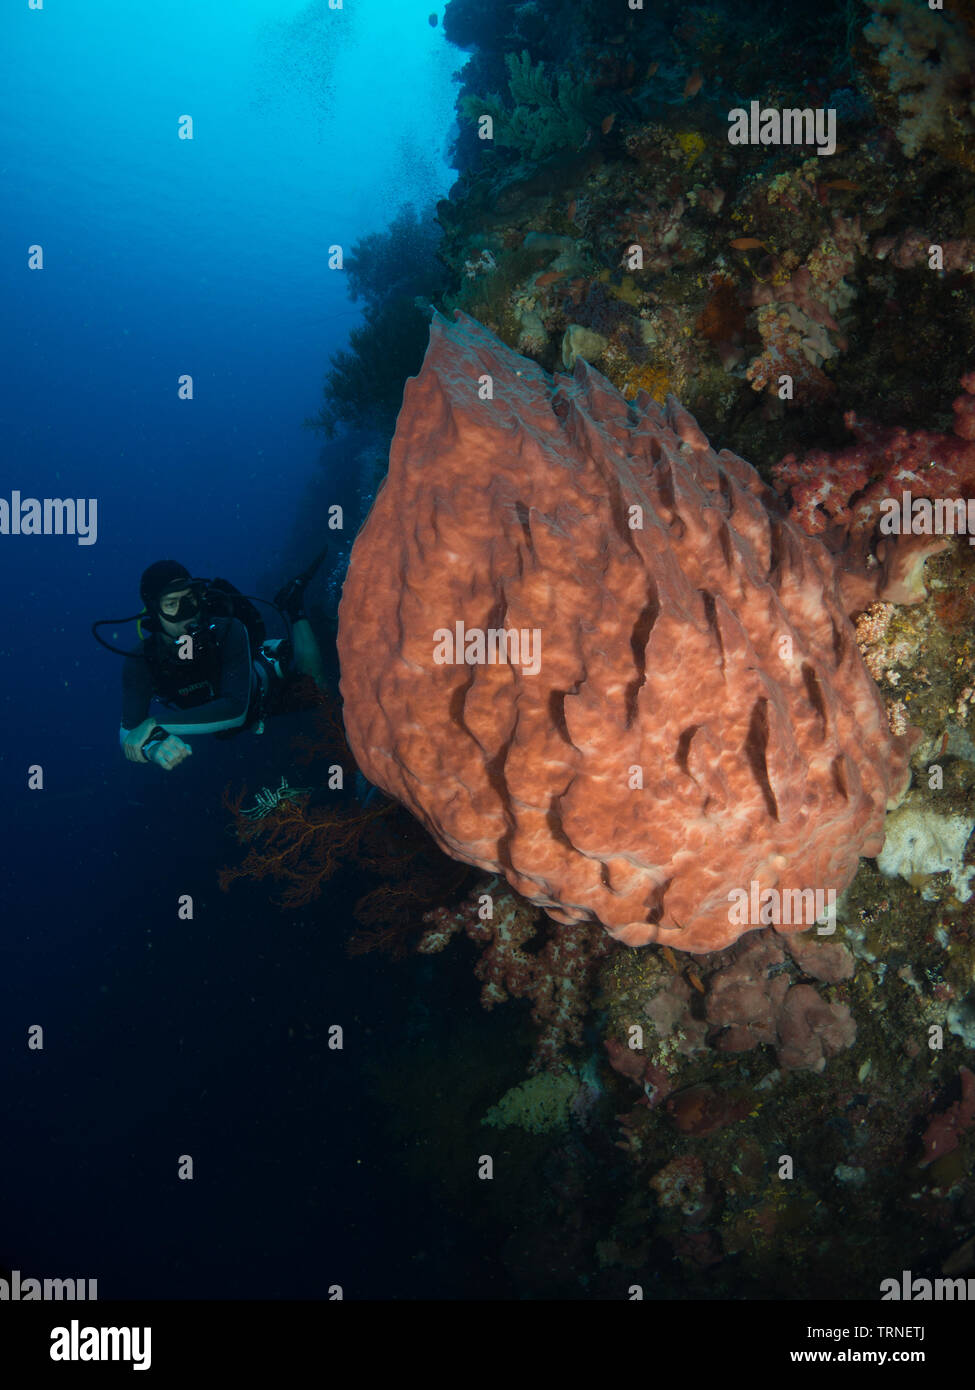 Scuba diver with giant sponge on colorful coral reef underwater in Bunaken Marine Park, North Sulawesi, Indonesia Stock Photo